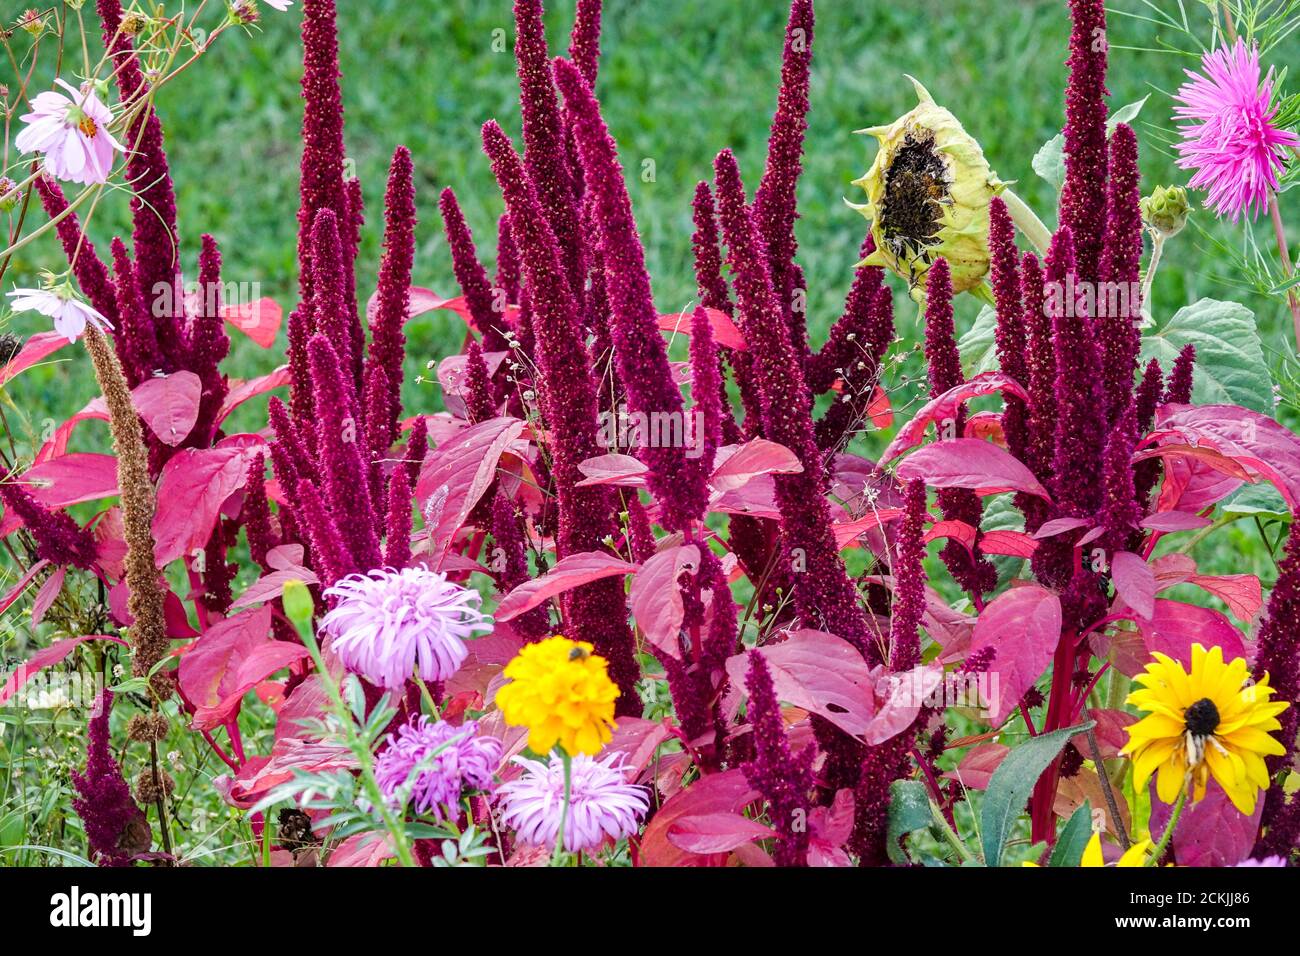 Red Amaranth Flowers Colorful Annual Bed Garden Flowers September Colourful Flowerbed Annuals Plants Herbaceous Red Amaranthus cruentus Late Summer Stock Photo